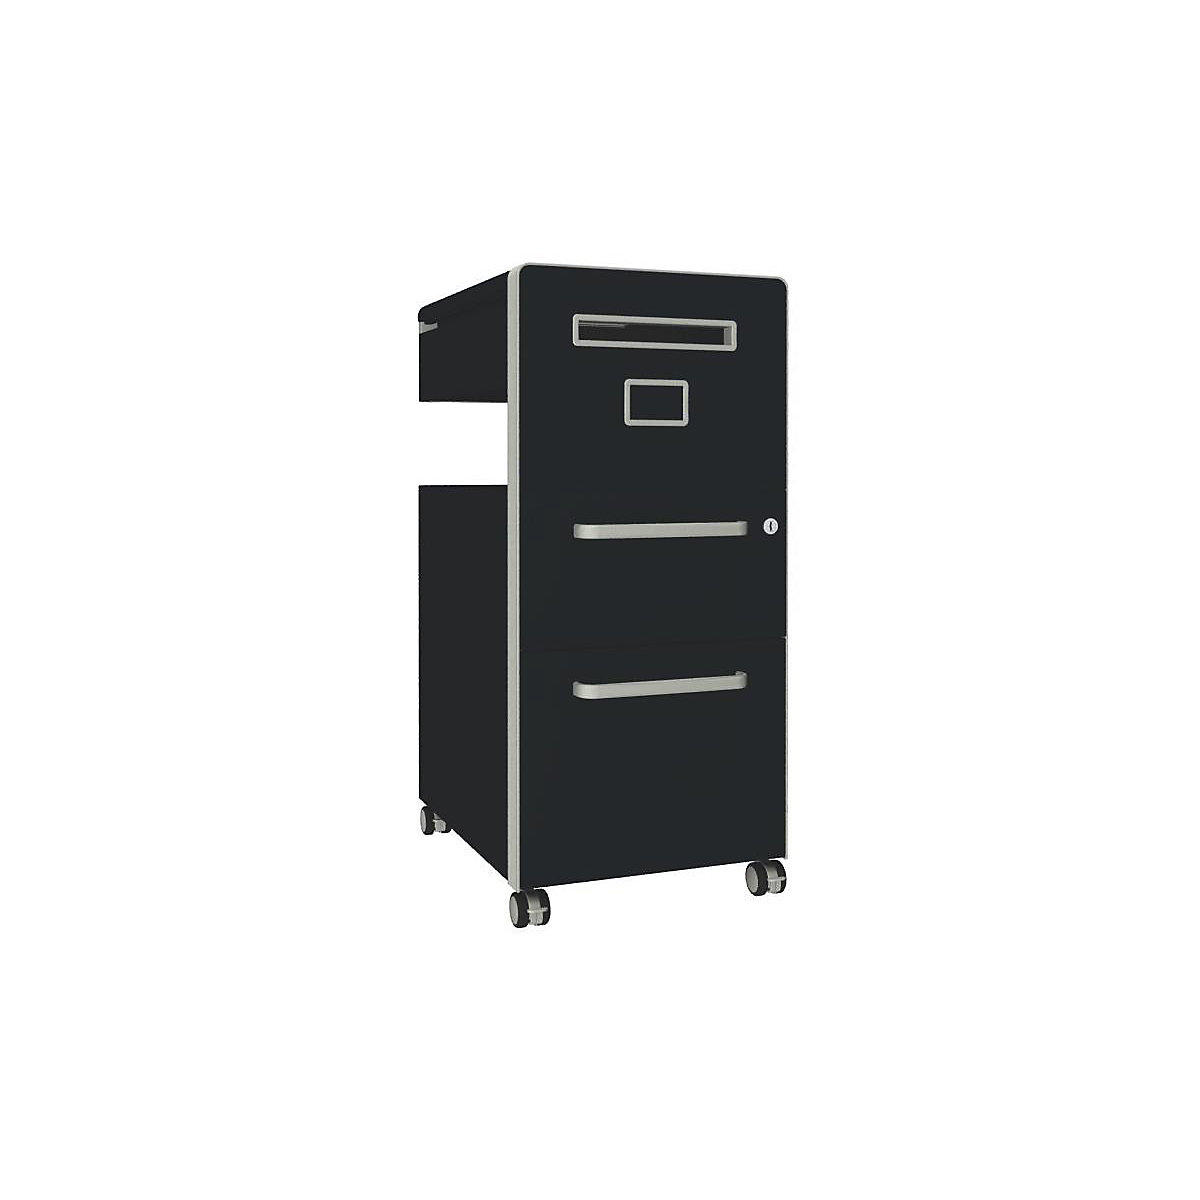 Bite™ pedestal furniture, with 1 whiteboard, opens on the right side – BISLEY, with 1 universal drawer, 1 suspension file drawer, prussian-27